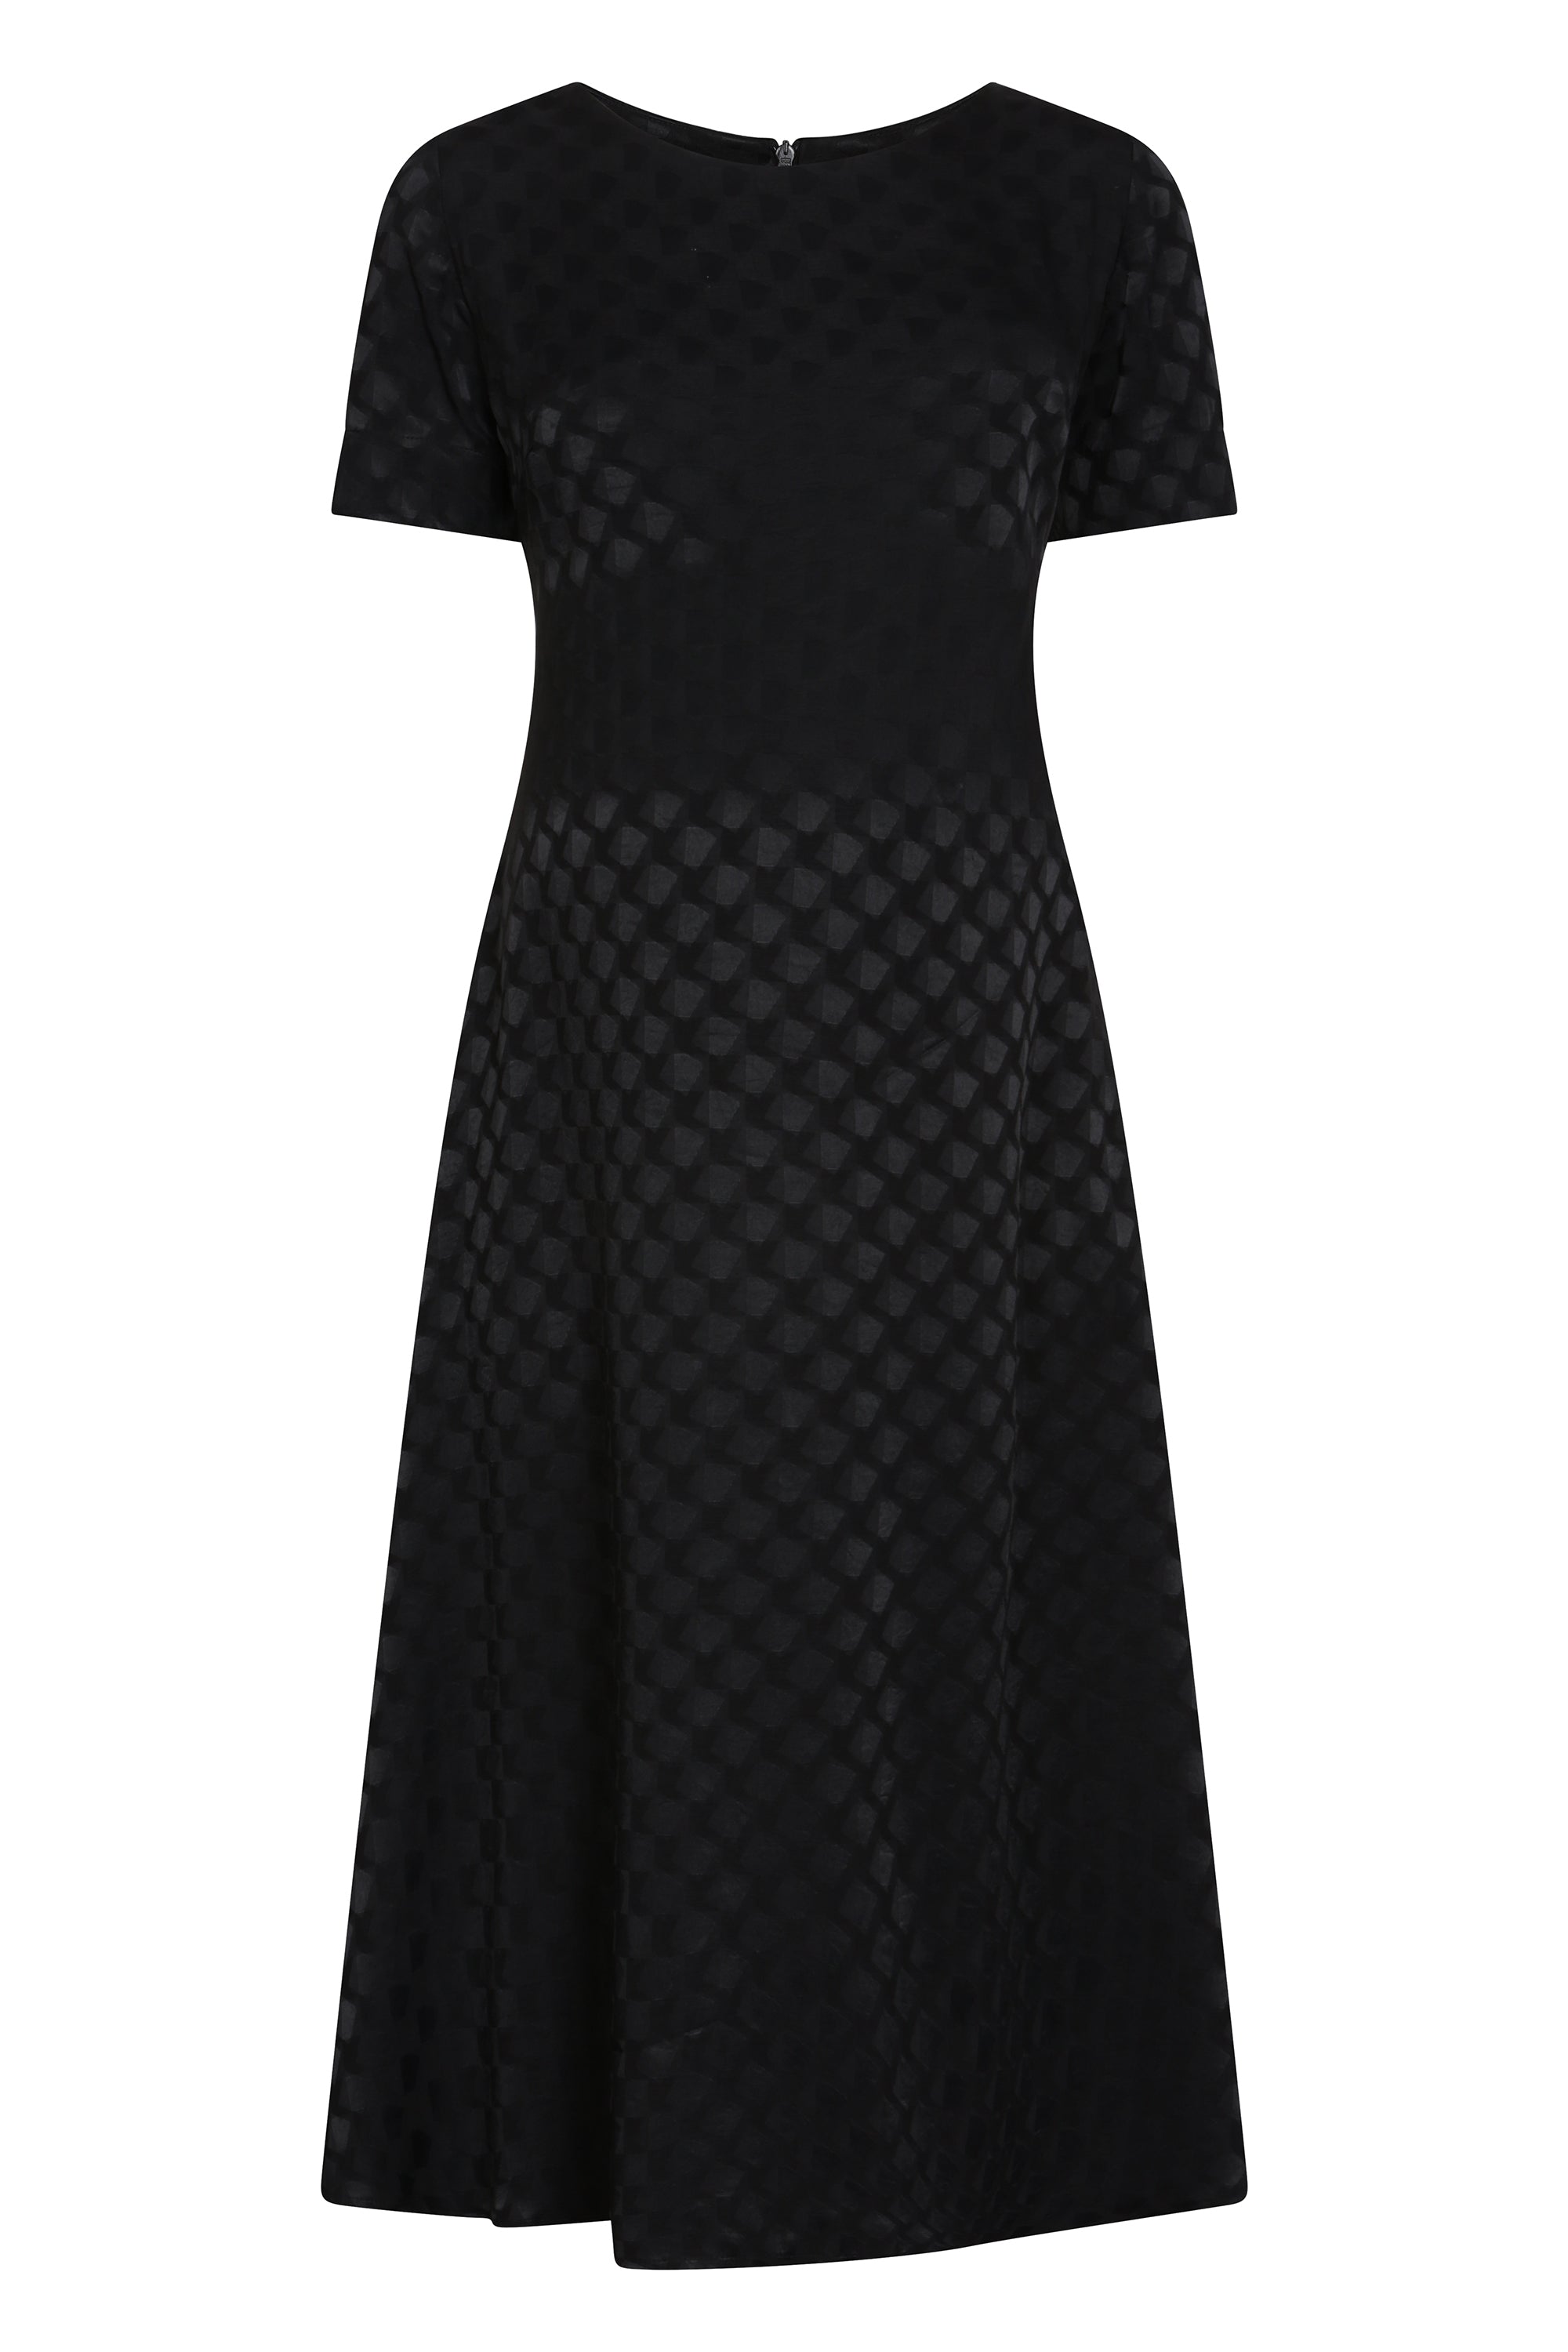 Black trapeze maternity dress. A-line trapeze style maternity dress, designed to be flattering for all stages of pregnancy and post-pregnancy too. Made in a beautiful luxurious textured satin, this is the perfect maternity dress for everyday, occasions or the office.